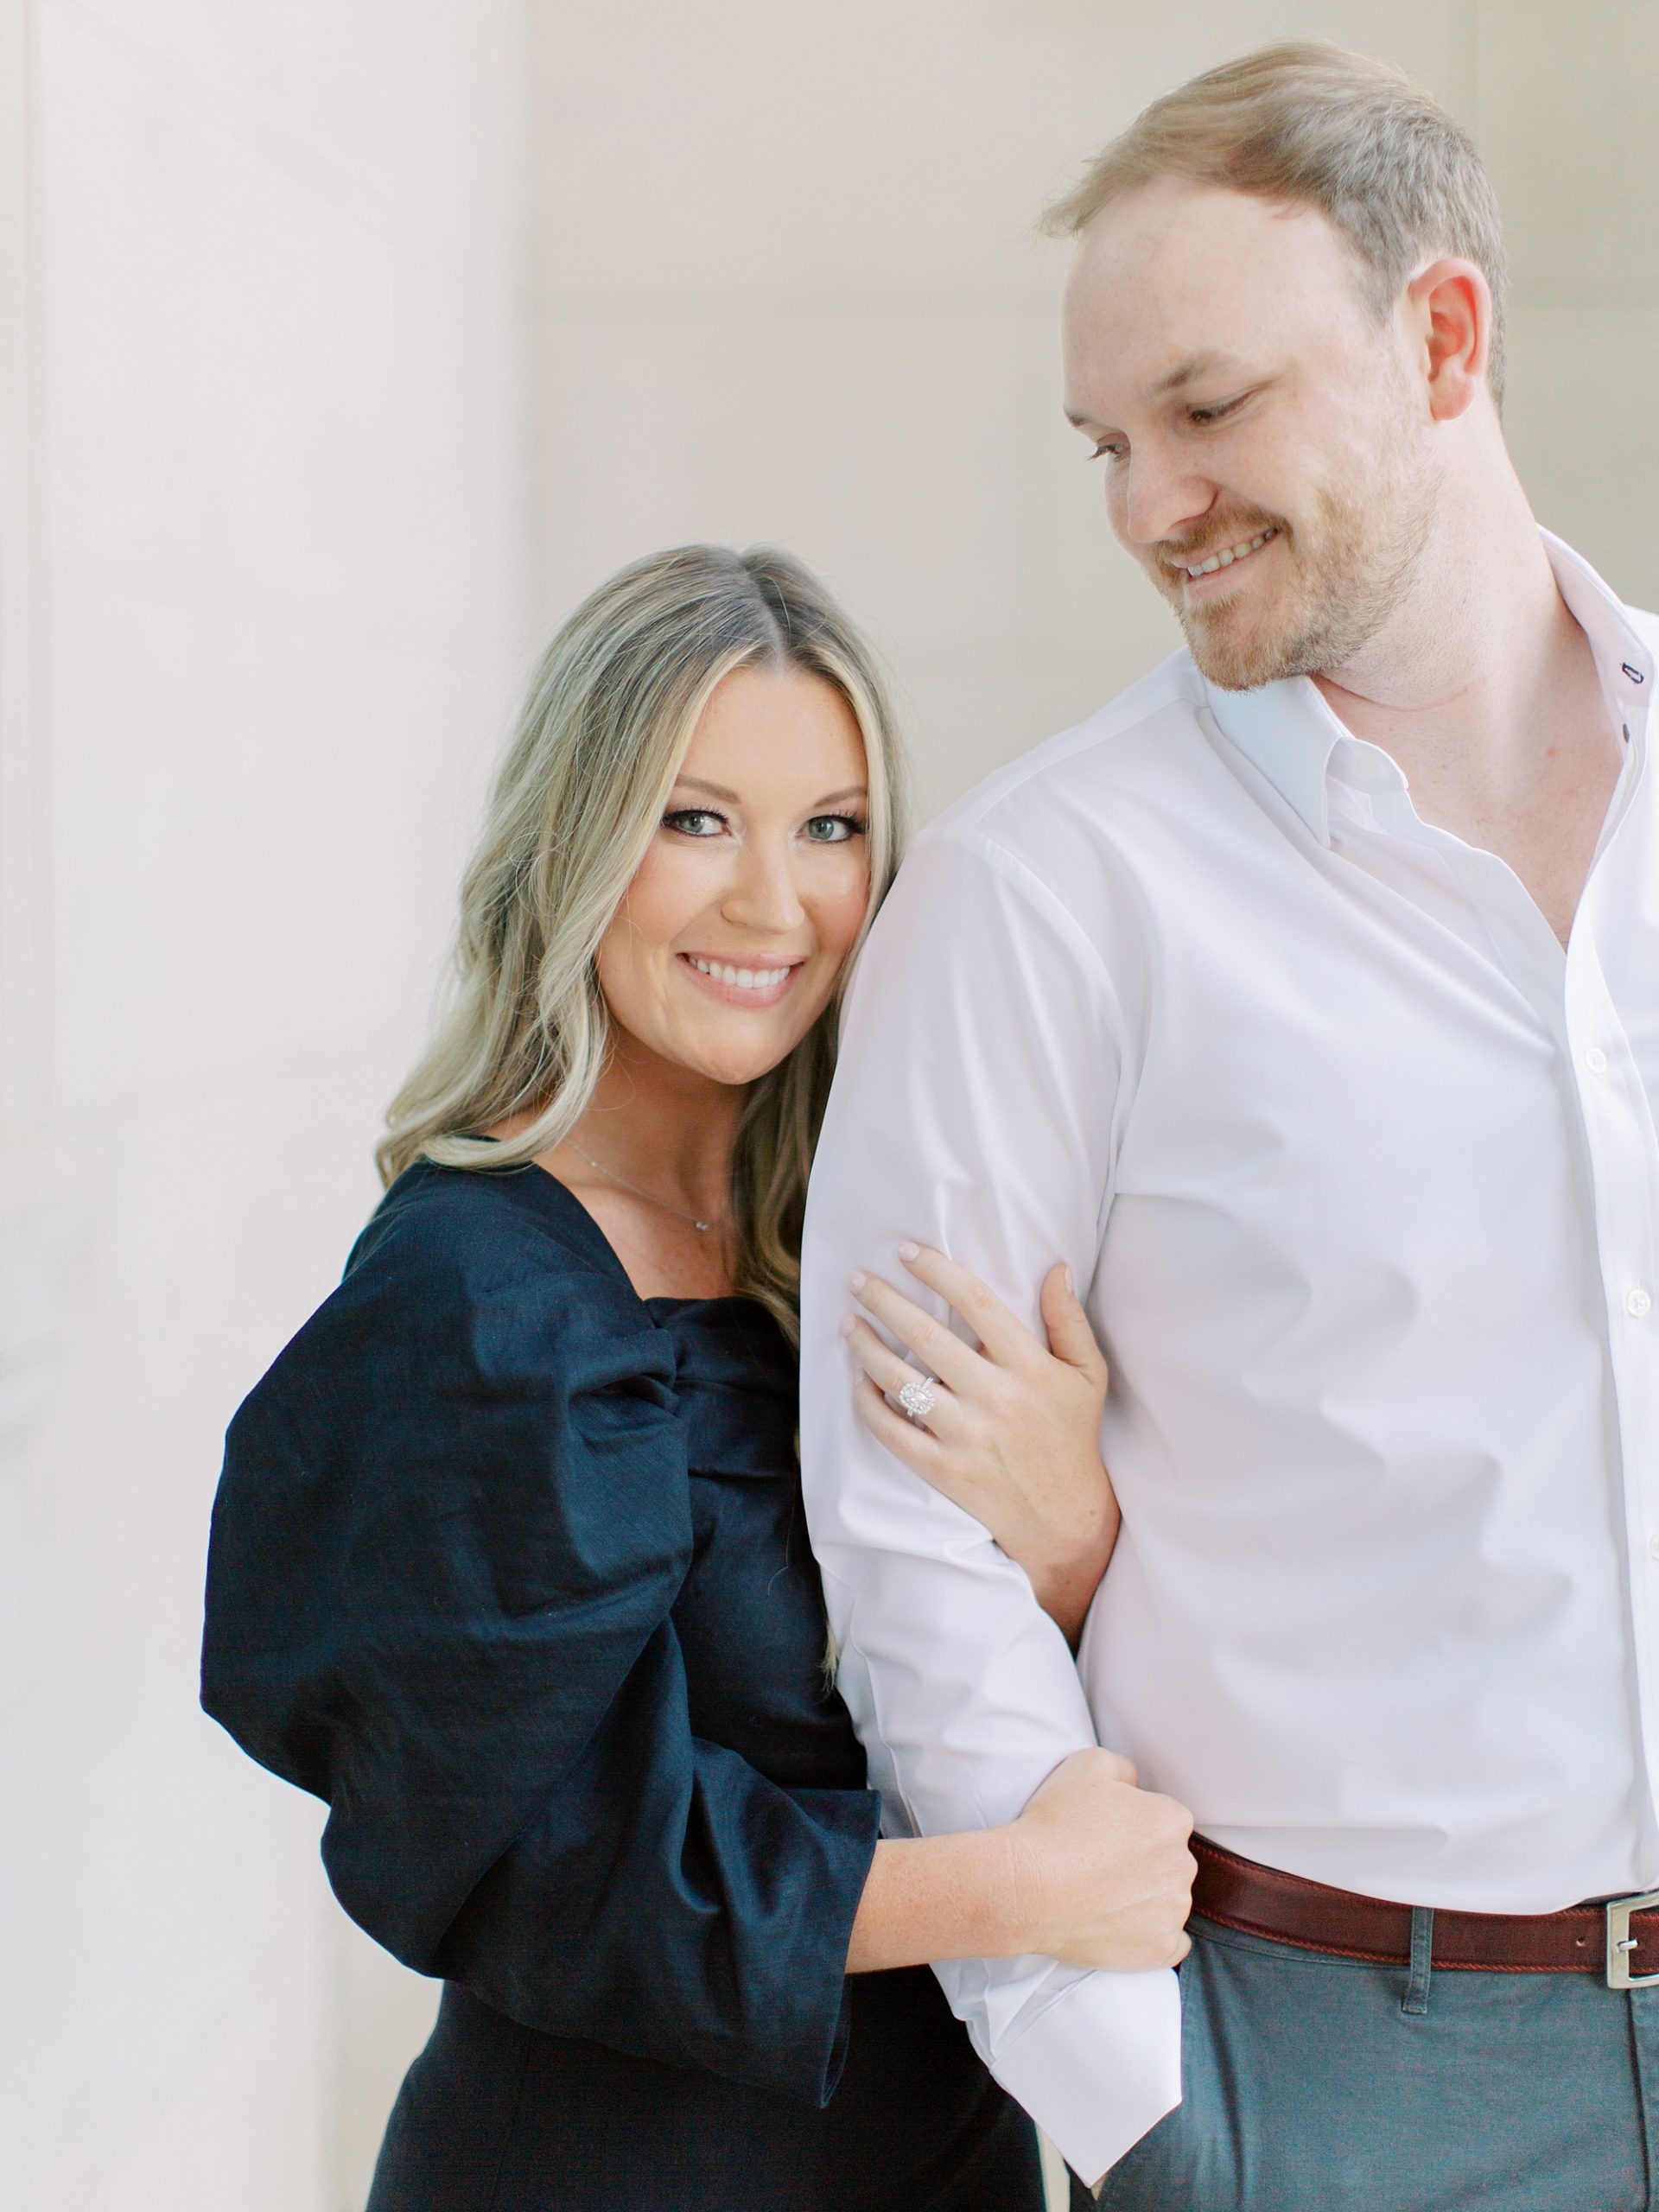 woman holds man's arm during Uptown Charlotte engagement session in building with marble walls